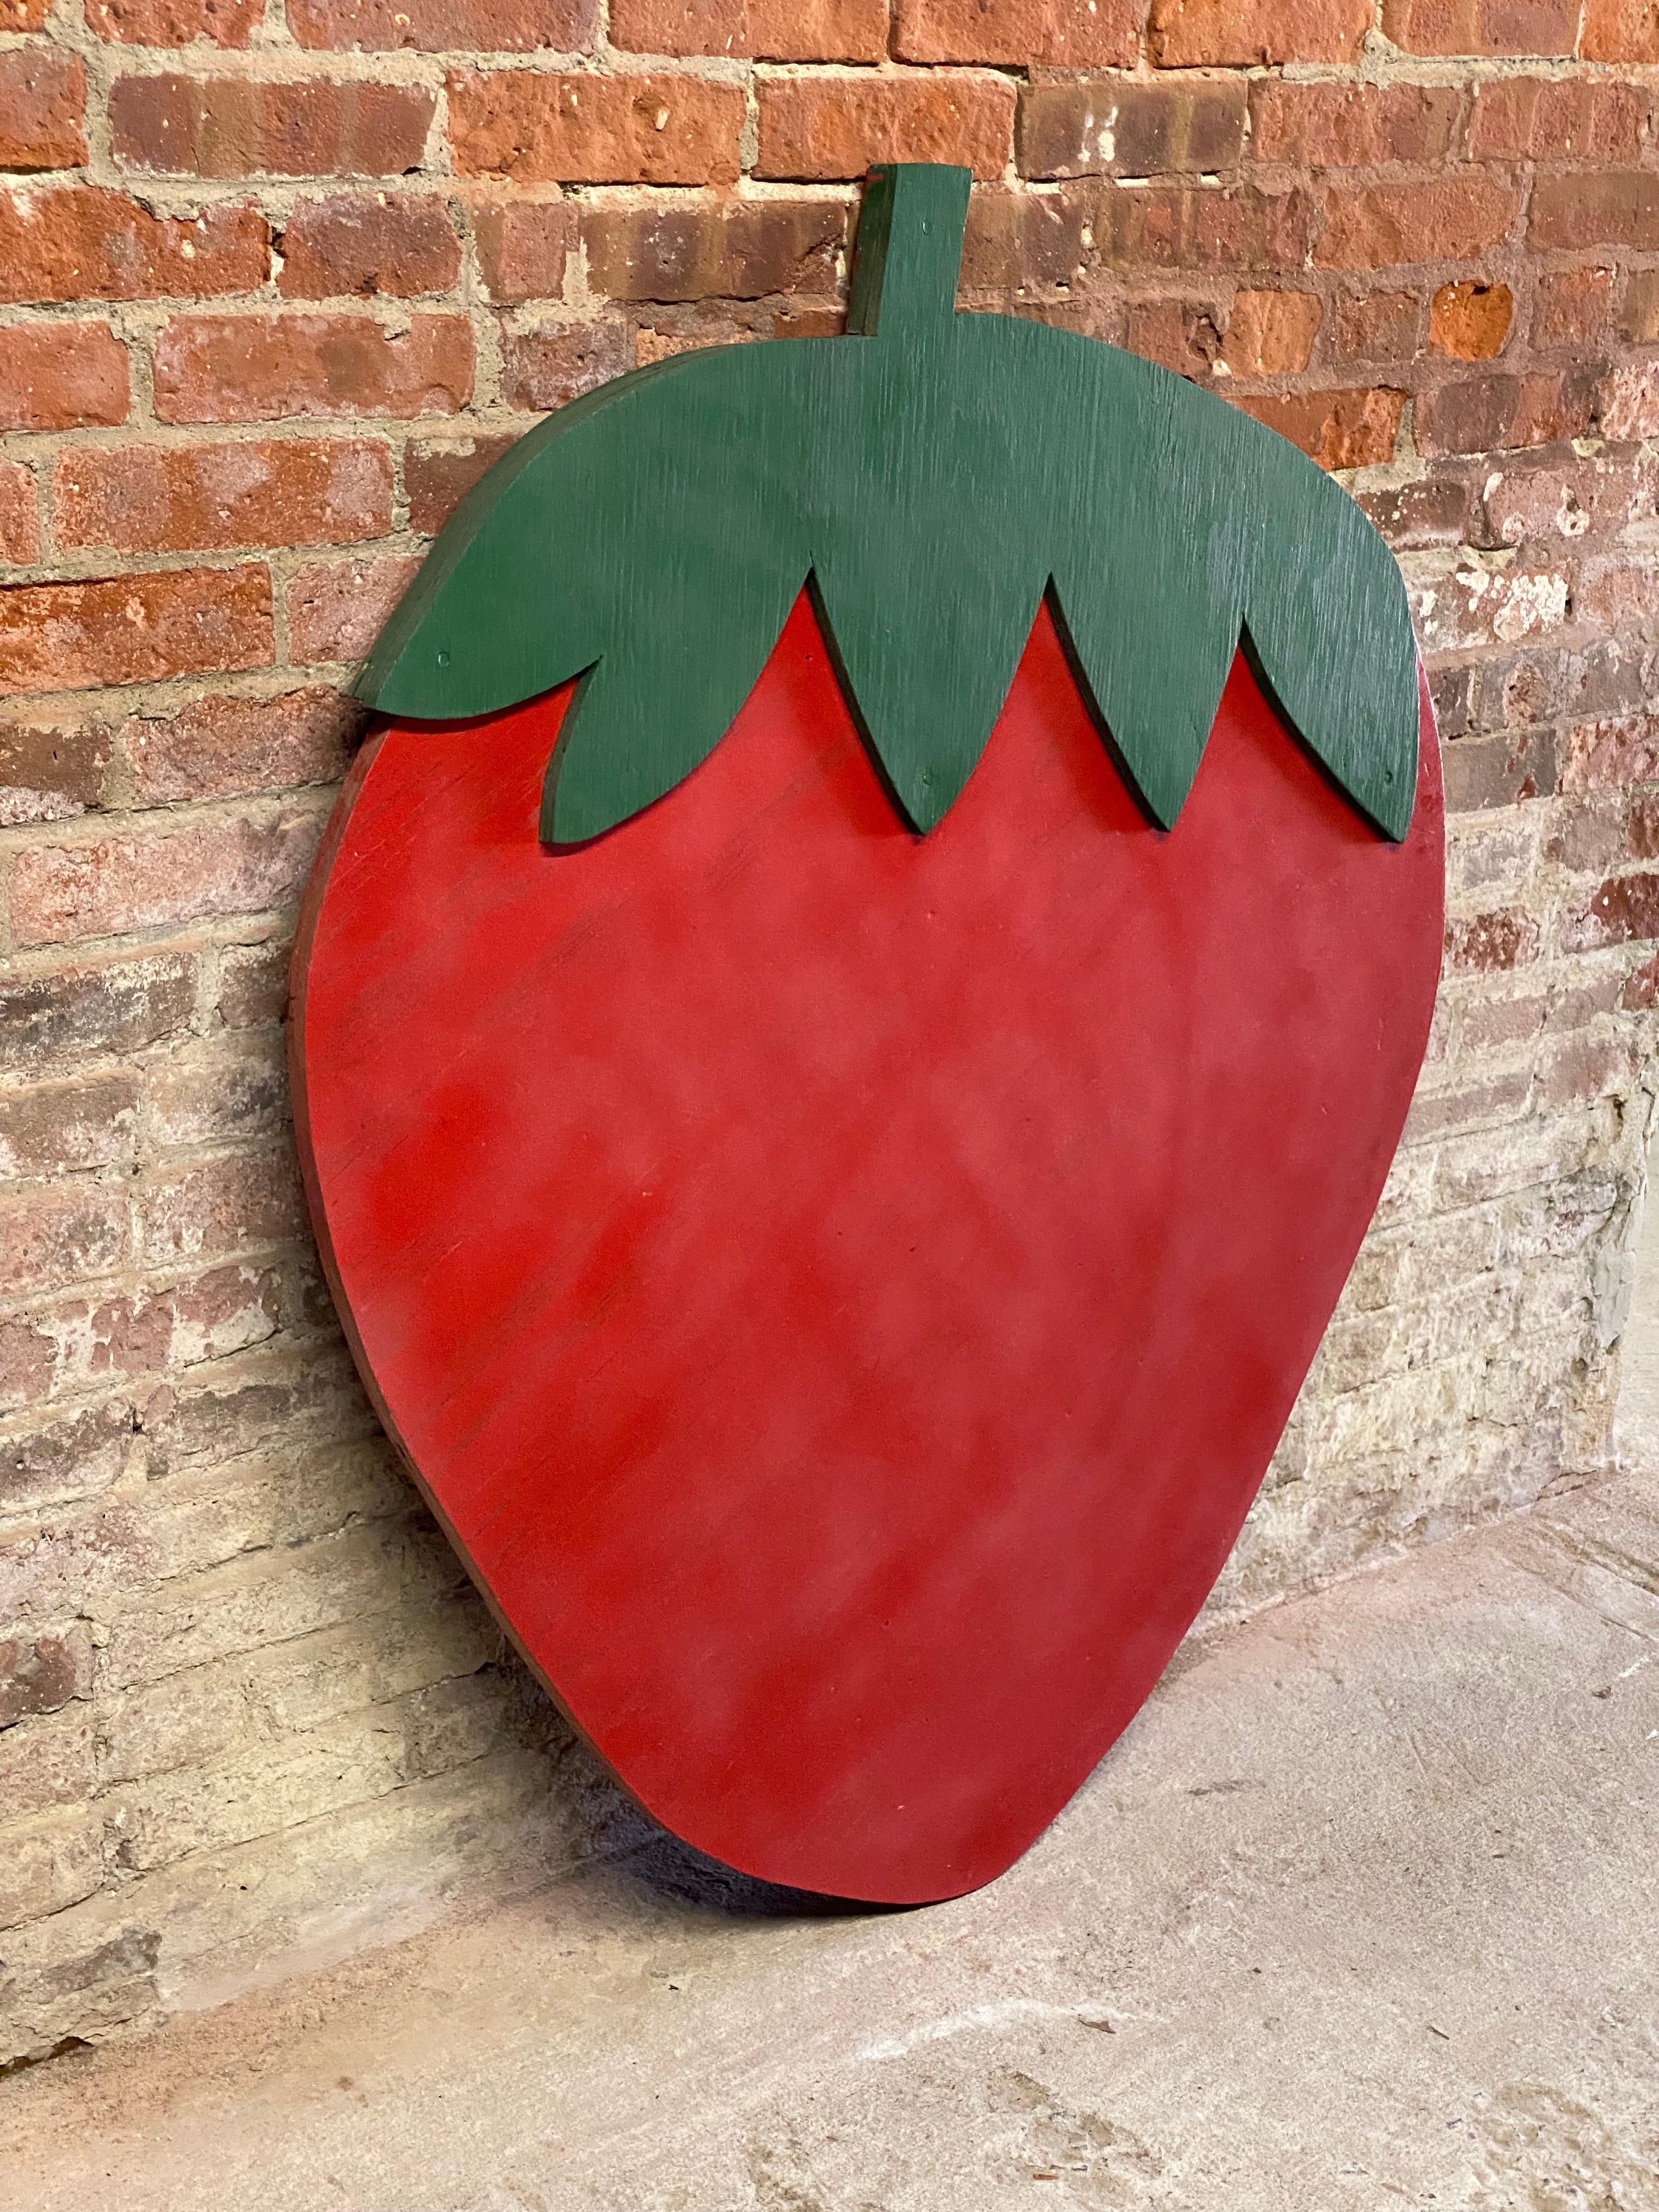 Bright red and green oversized plywood strawberry farm stand sign. The berry farmer had multiple acres in rural Rhinebeck, New York, Dutchess County. Oversized for greater visibility. Circa 1970-80. The gentleman farmer retired from his full time